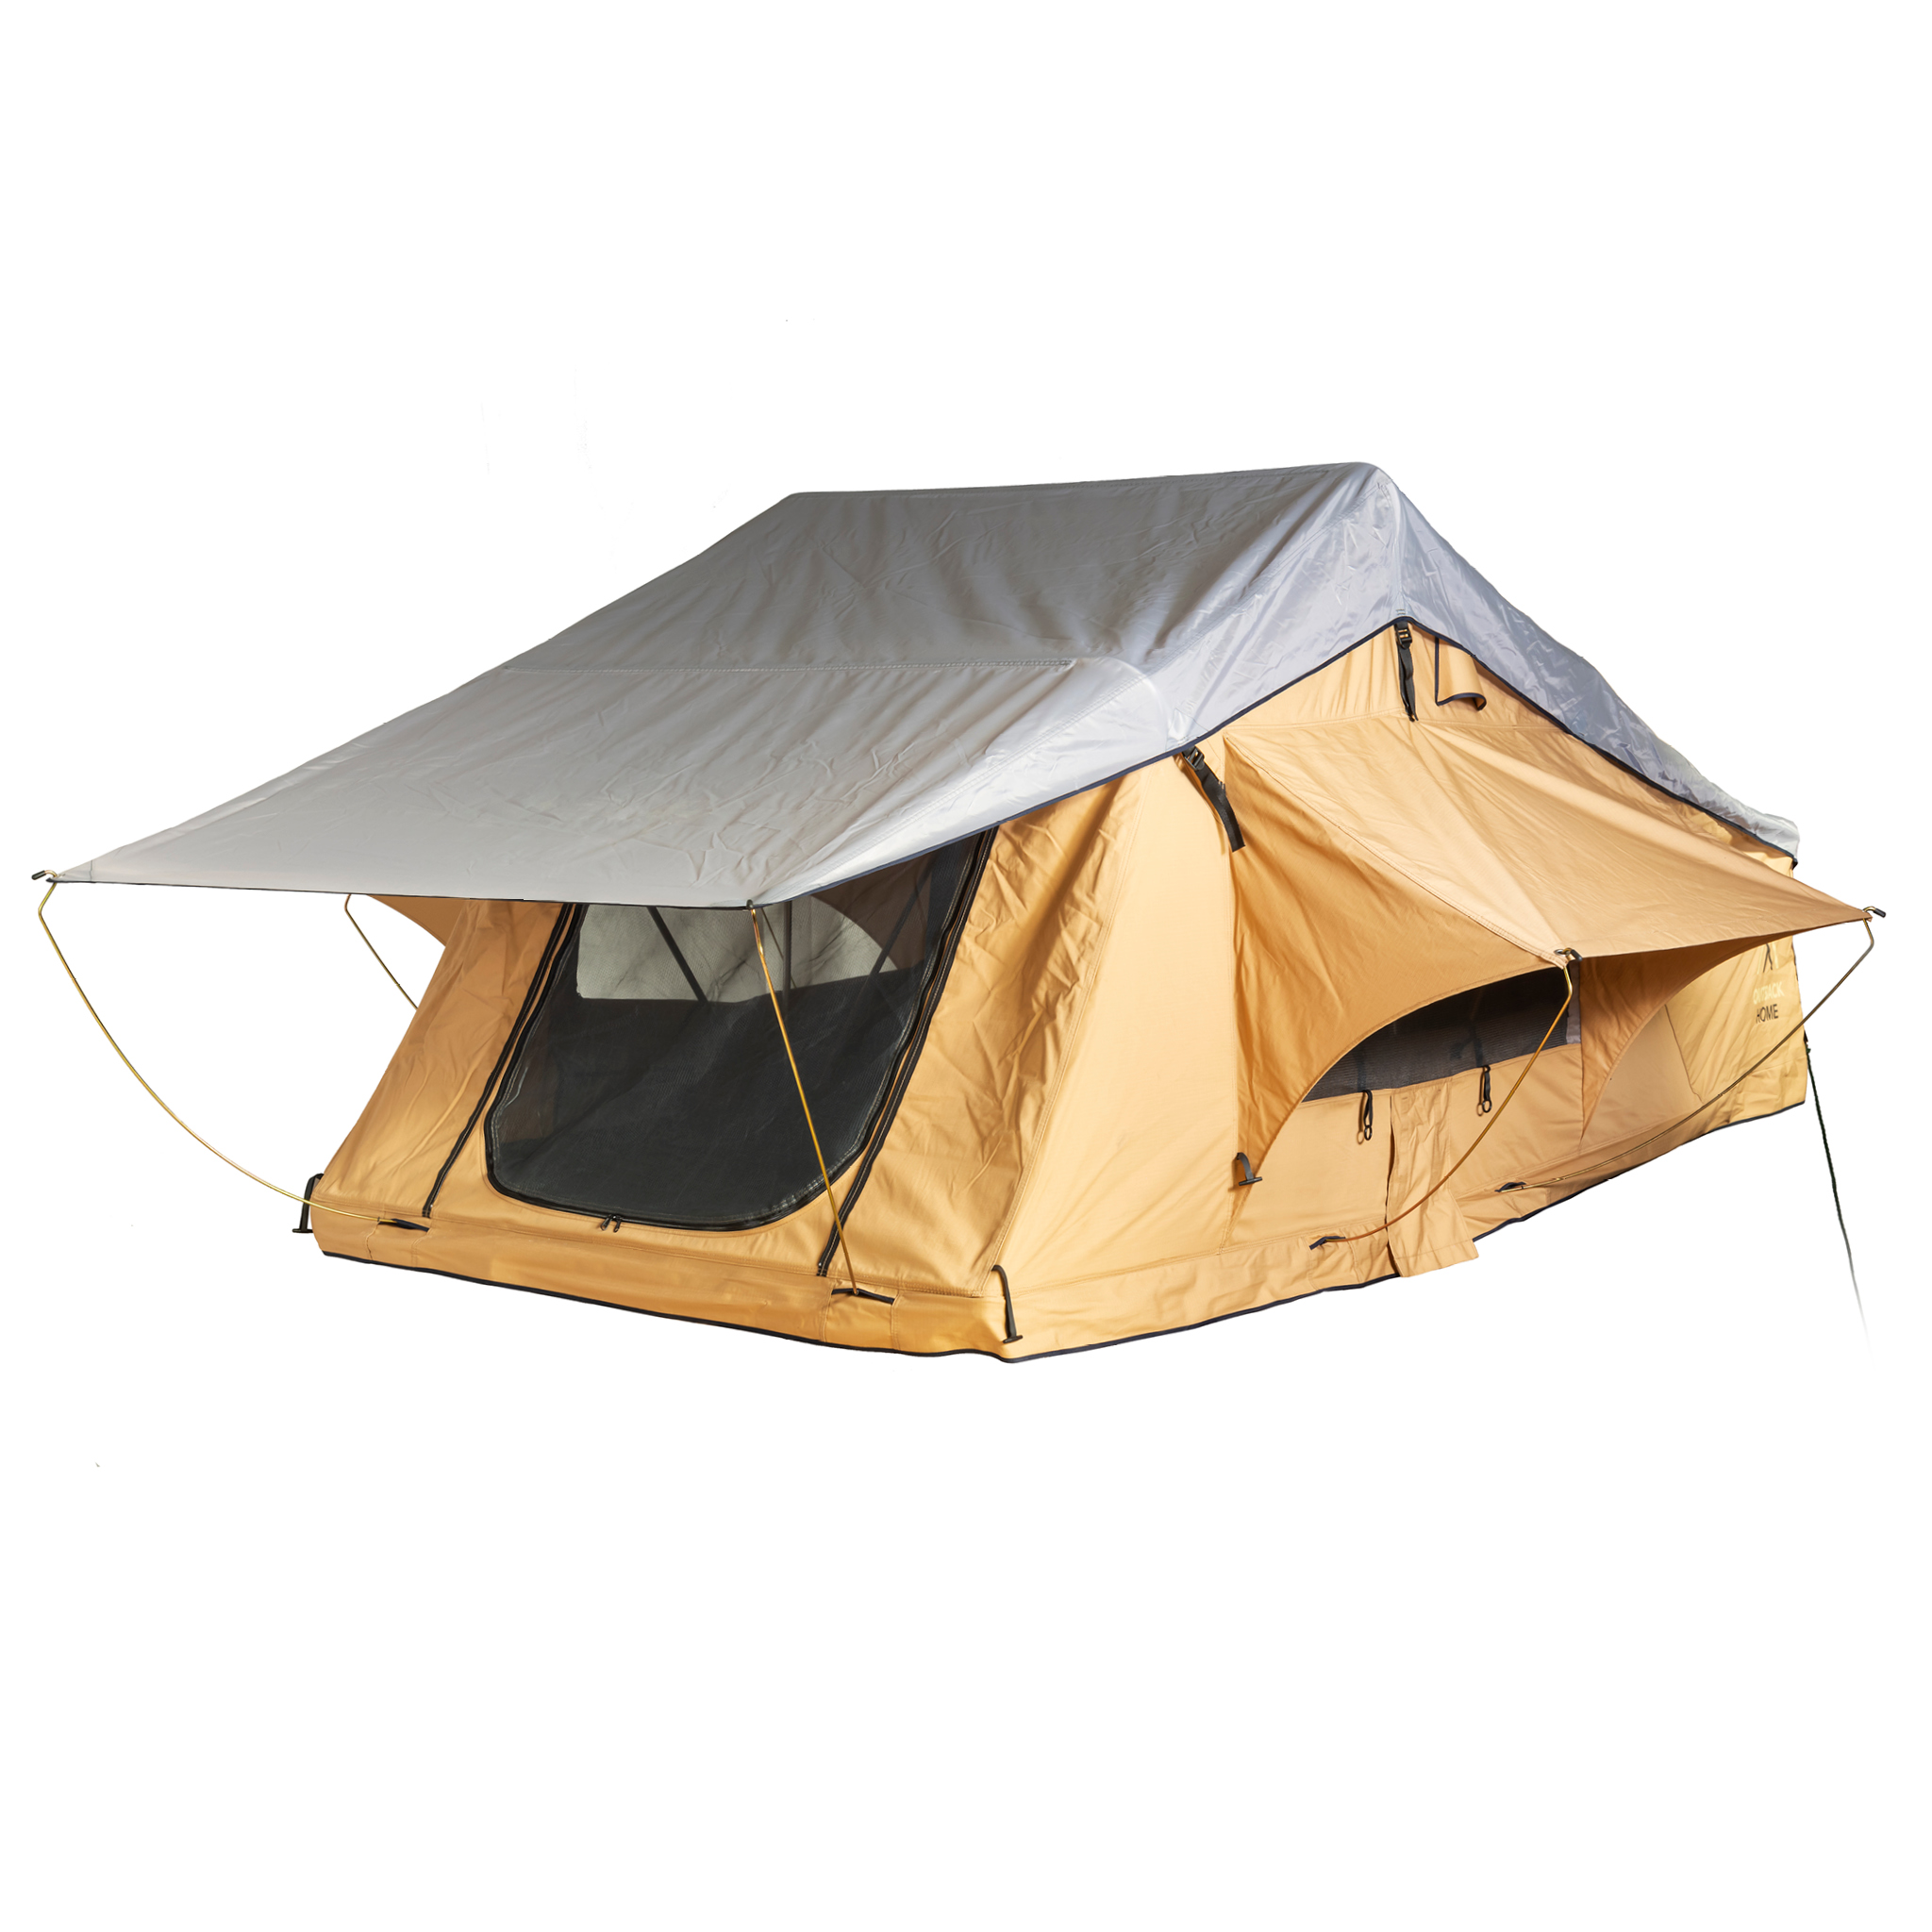 Freedom 180 Roof top Tent      180cm grey / khaki      Outback Home